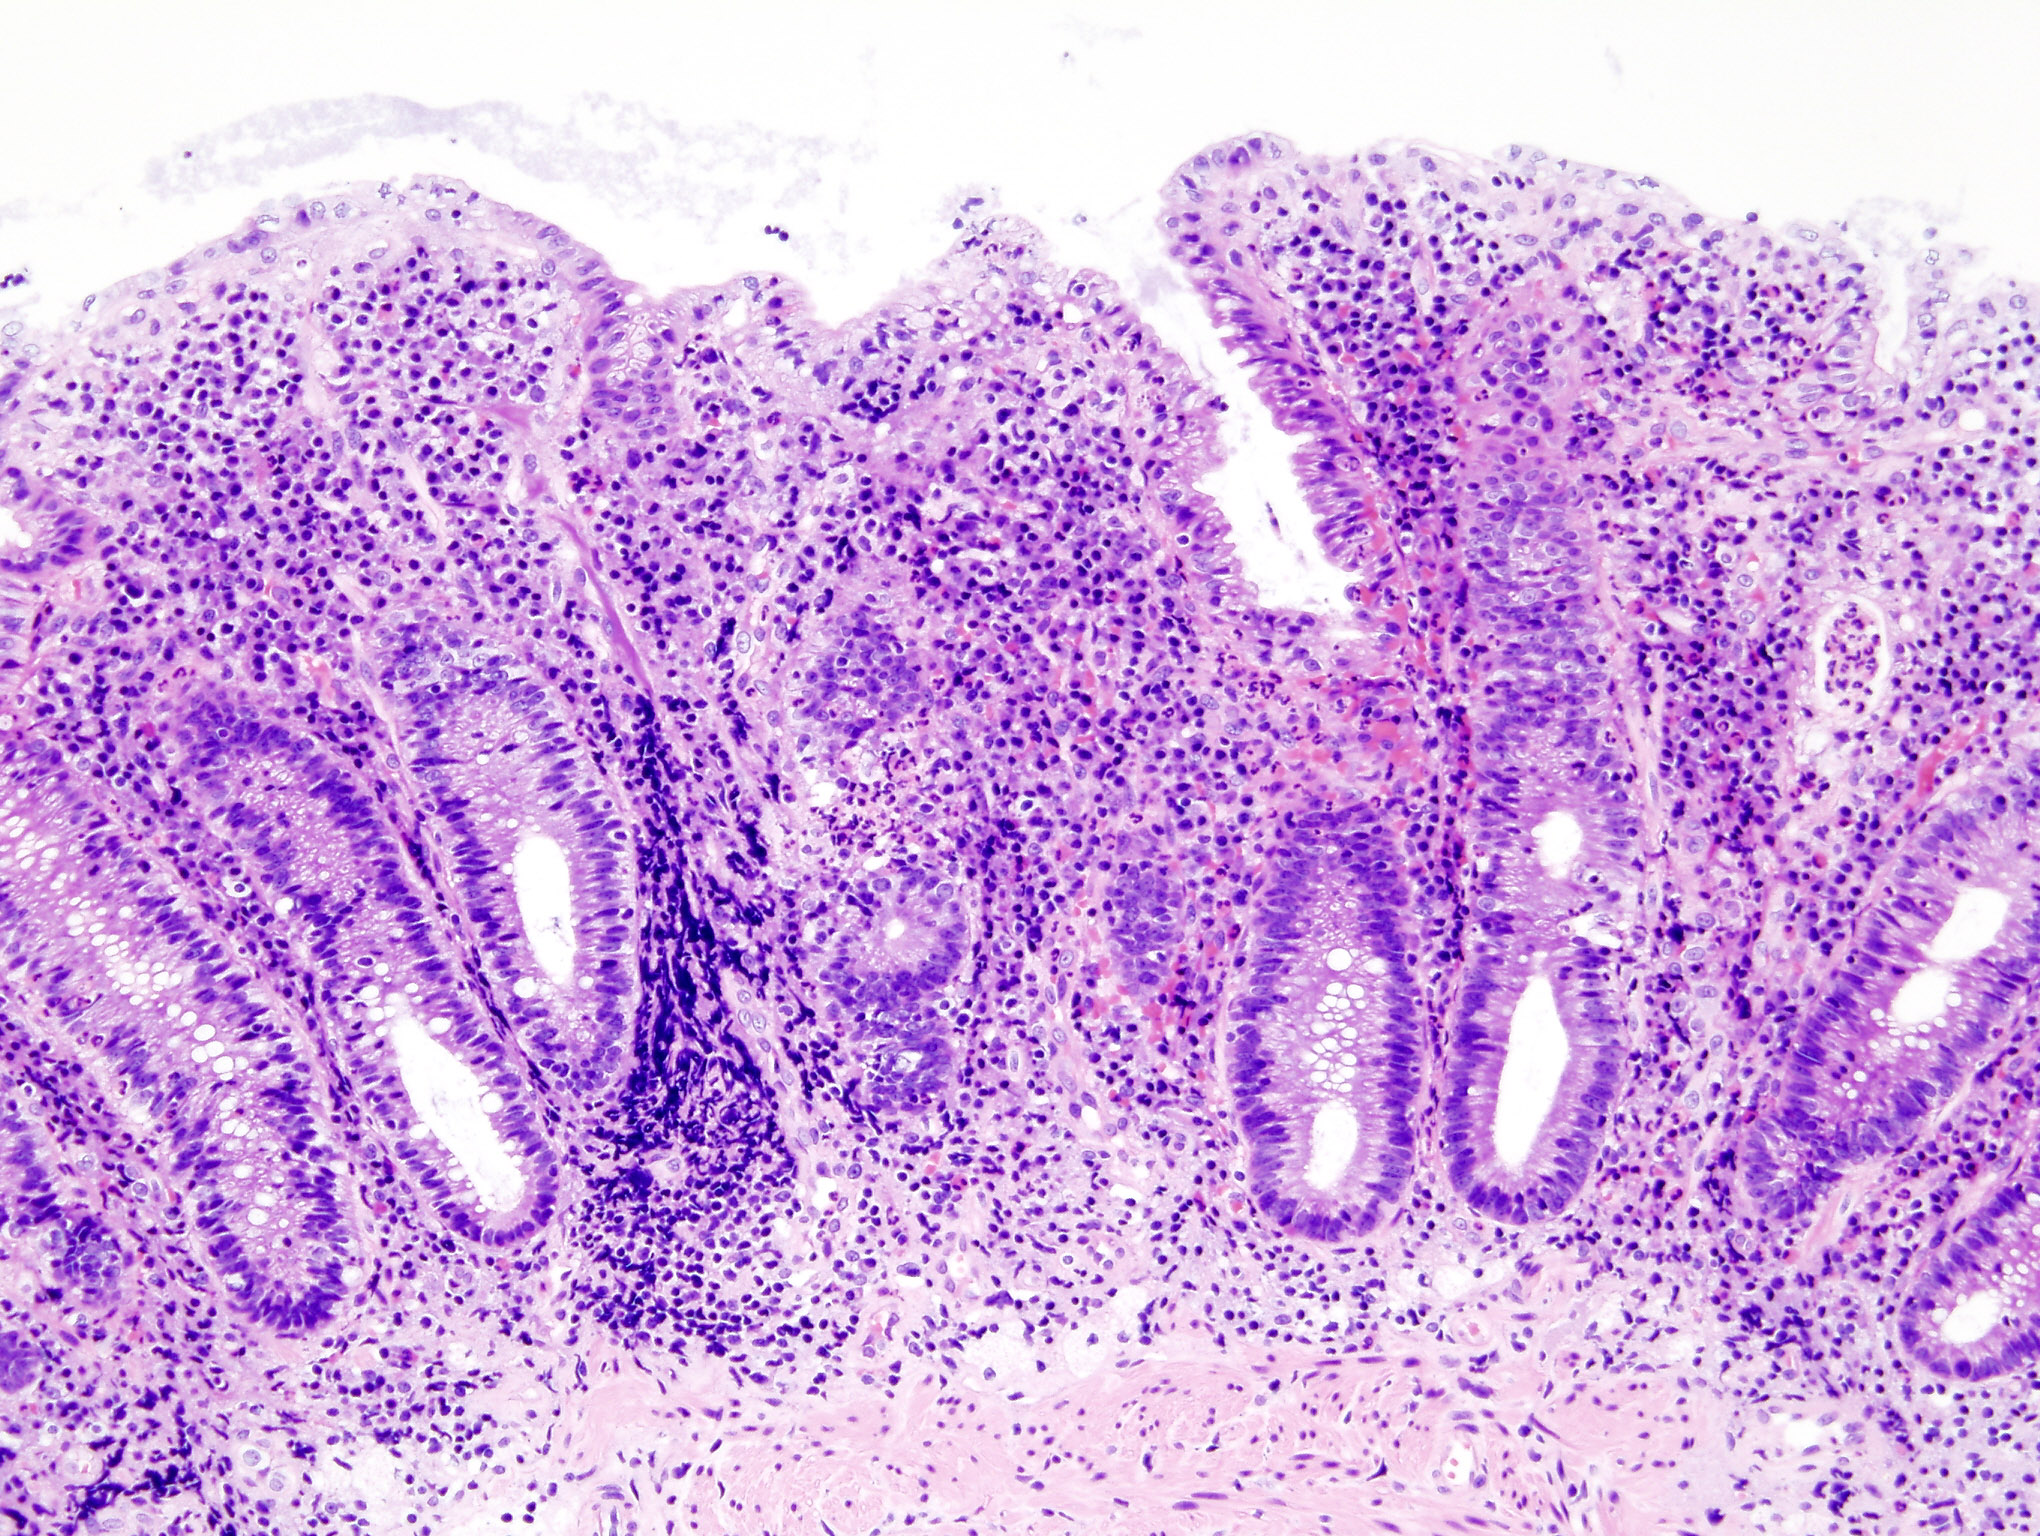 Ulcerative colitis. H&E stain showing marked lymphocytic infiltration (blue/purple) of the intestinal mucosa and distortion of the architecture of the crypts. [14]